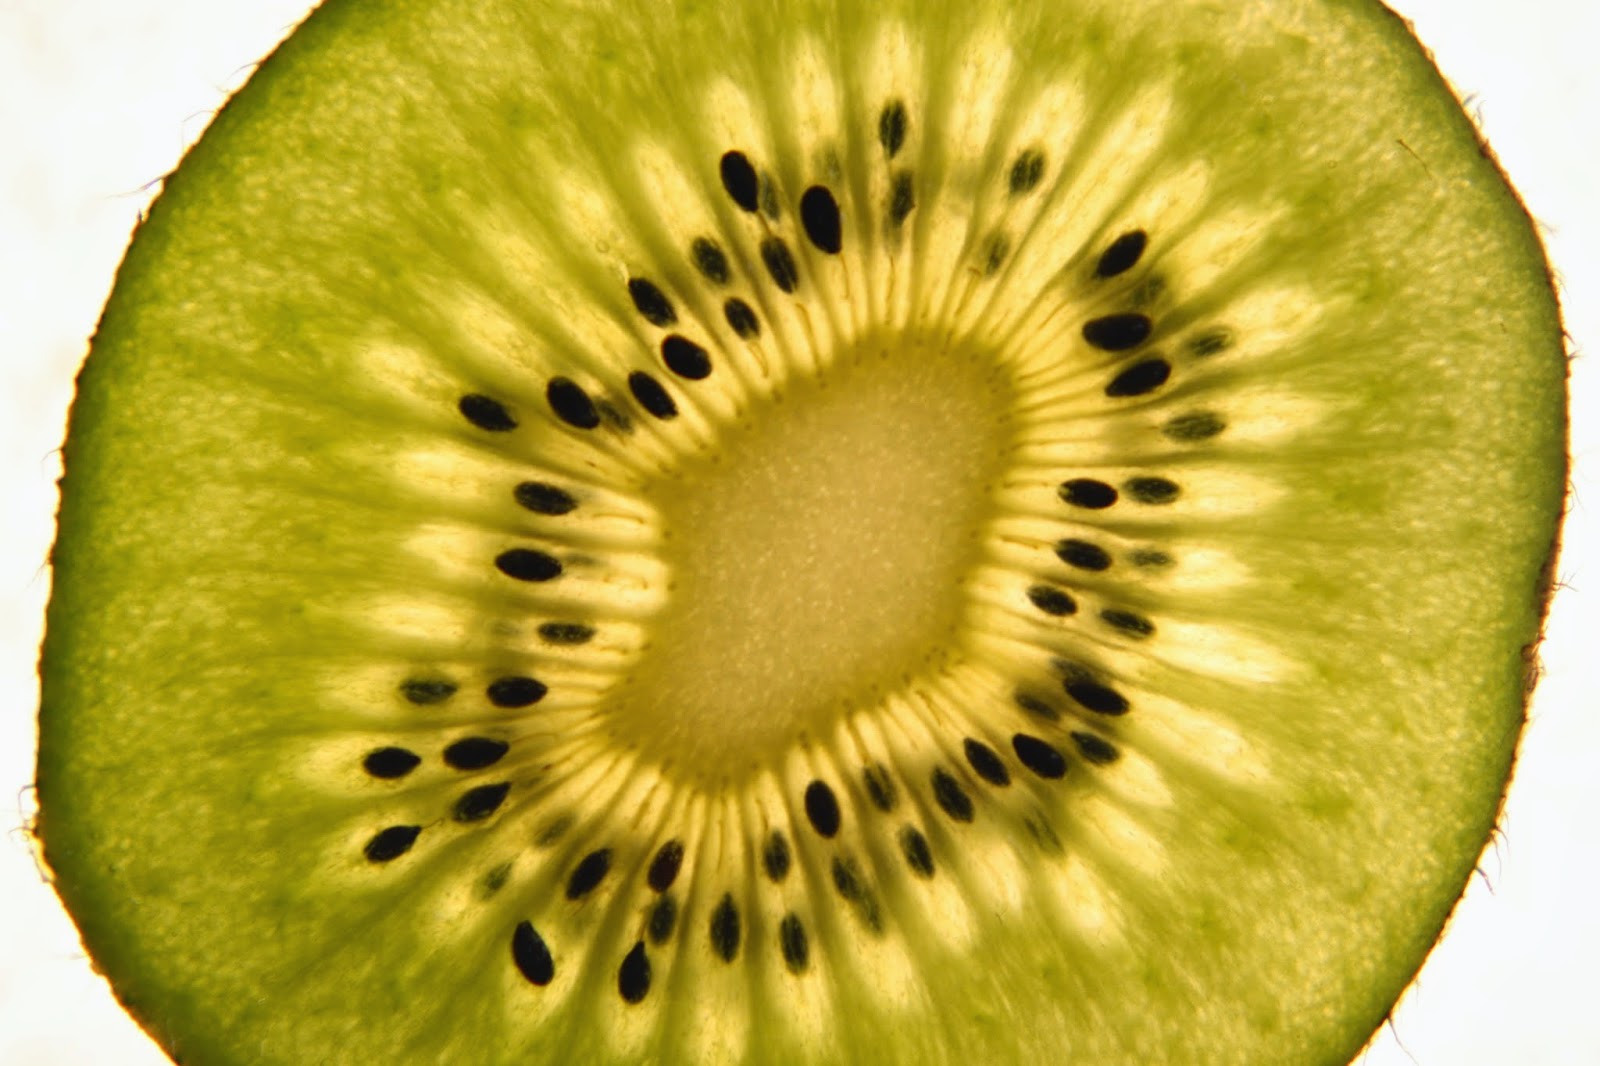 Kiwi Close-Up Photographed with 10x Close-Up Lens | Boost Your Photography